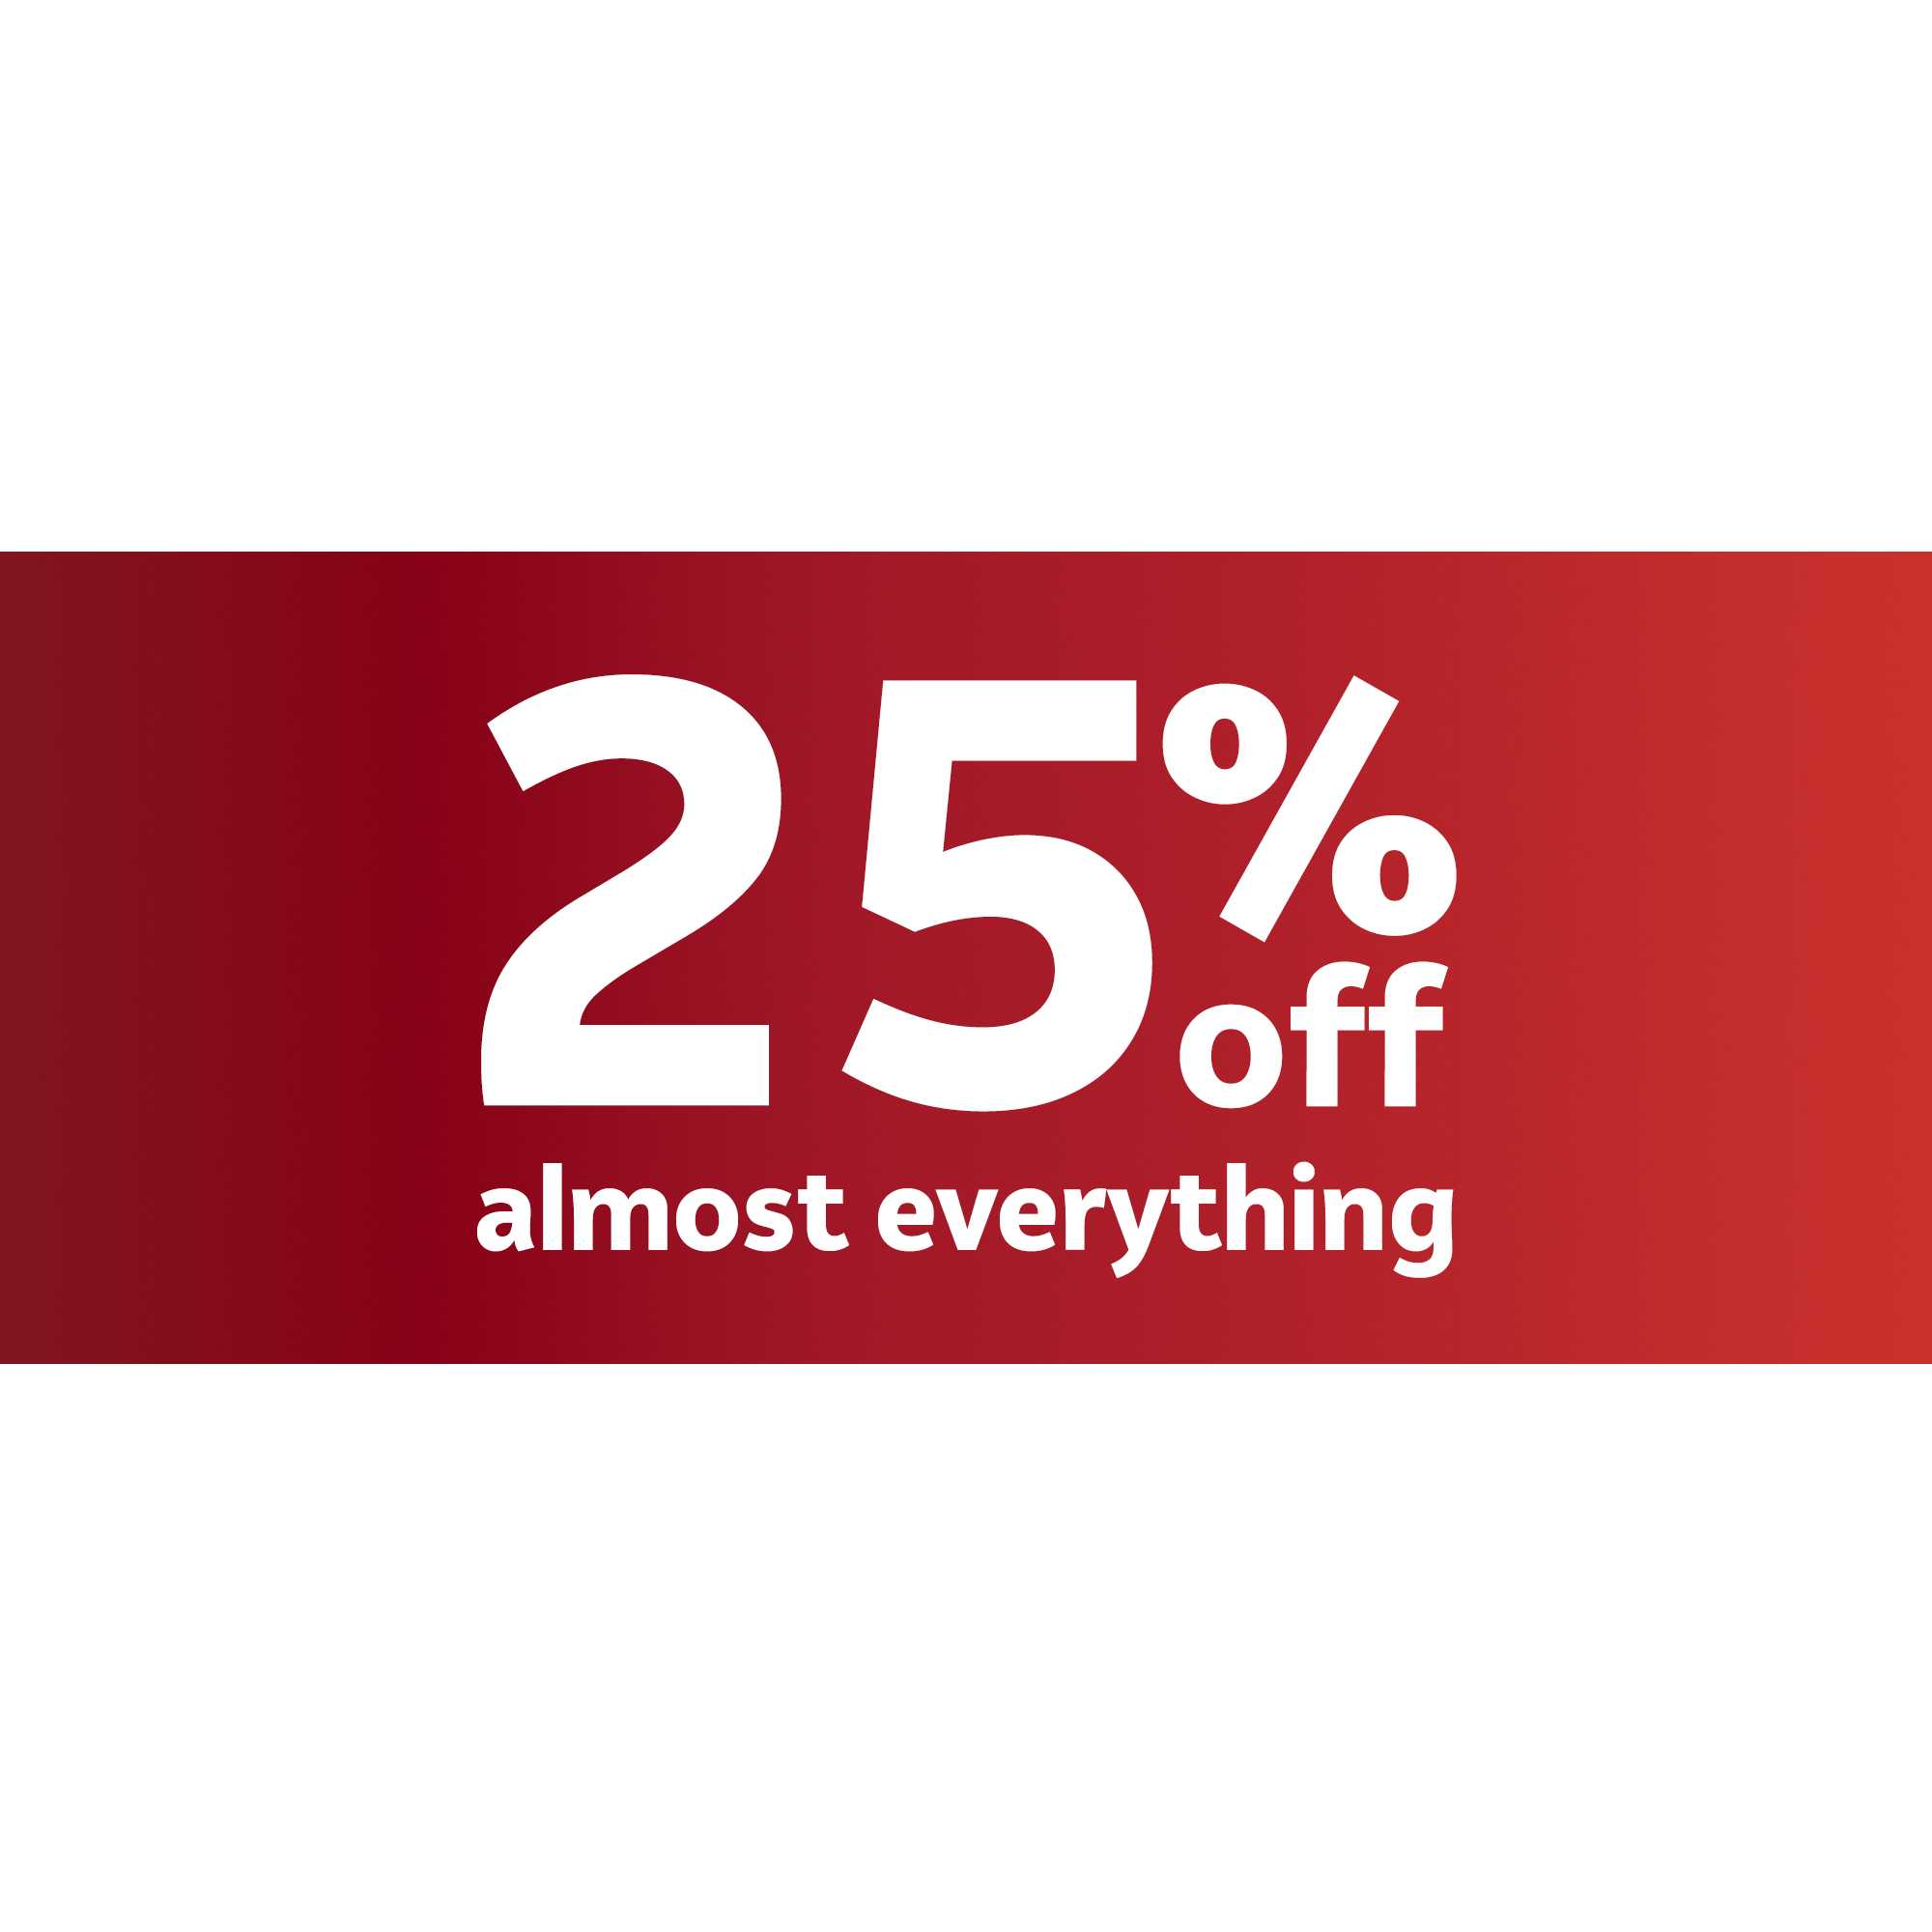 25% off almost everything.